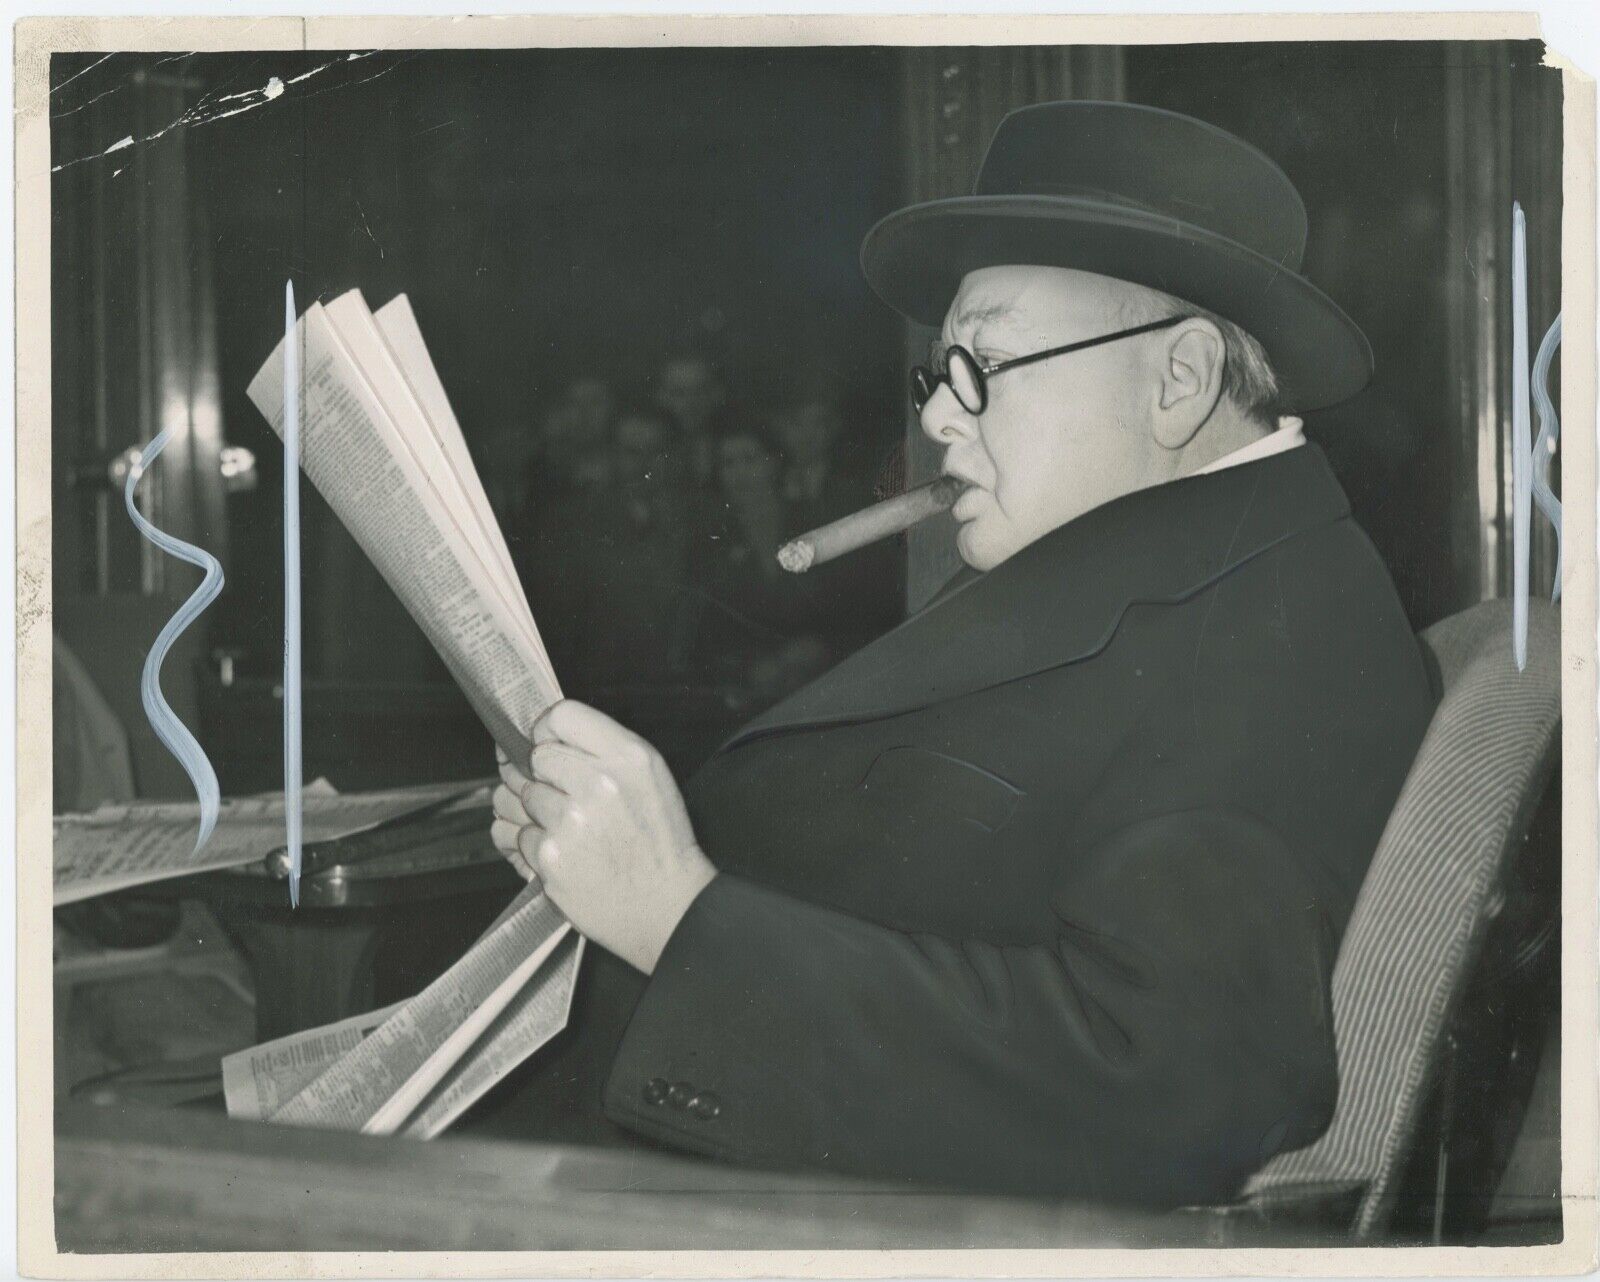 23 October 1951 press photo of Churchill after speaking during election campaign